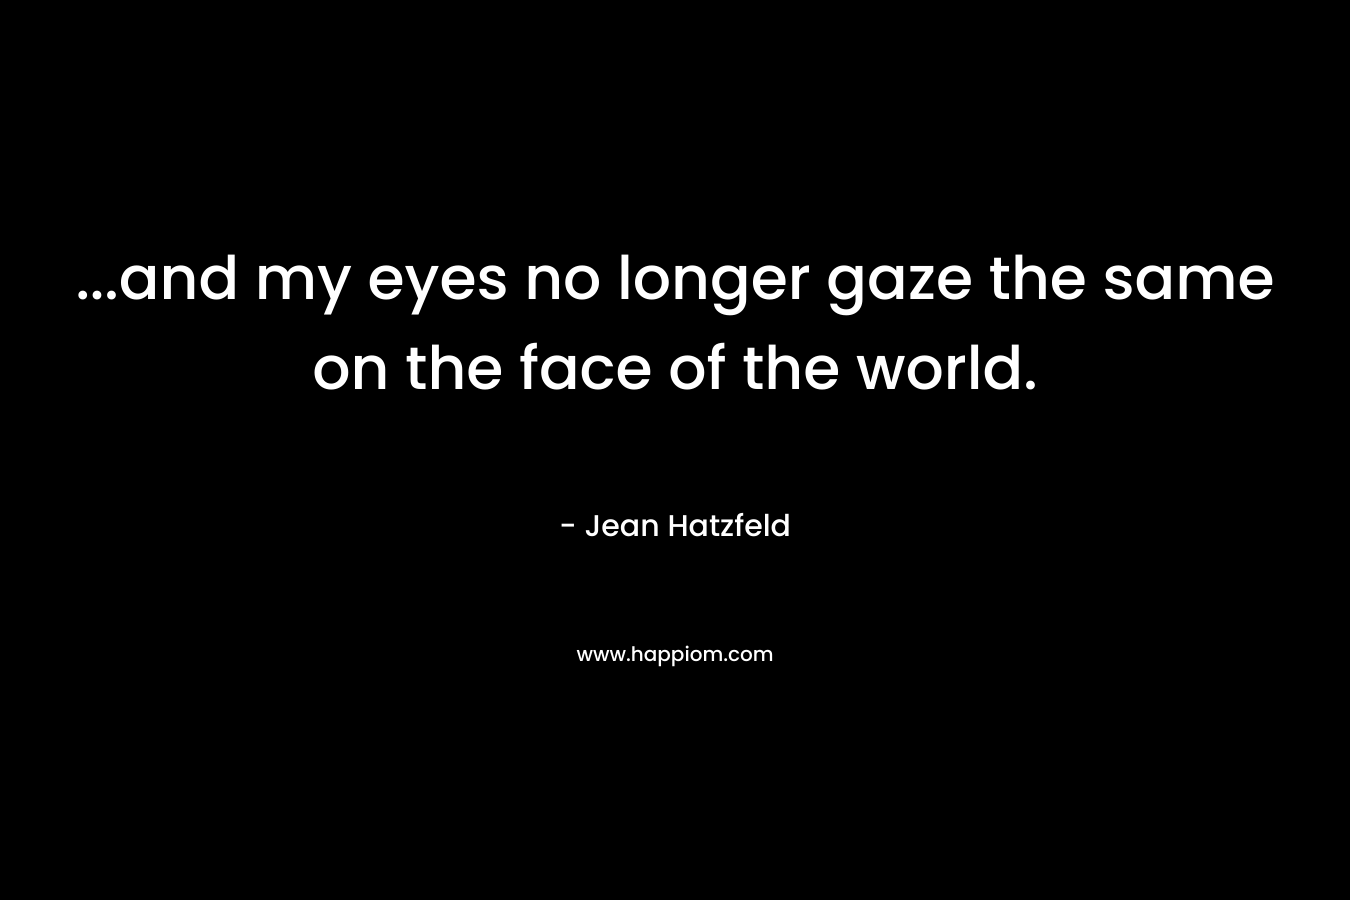 ...and my eyes no longer gaze the same on the face of the world.